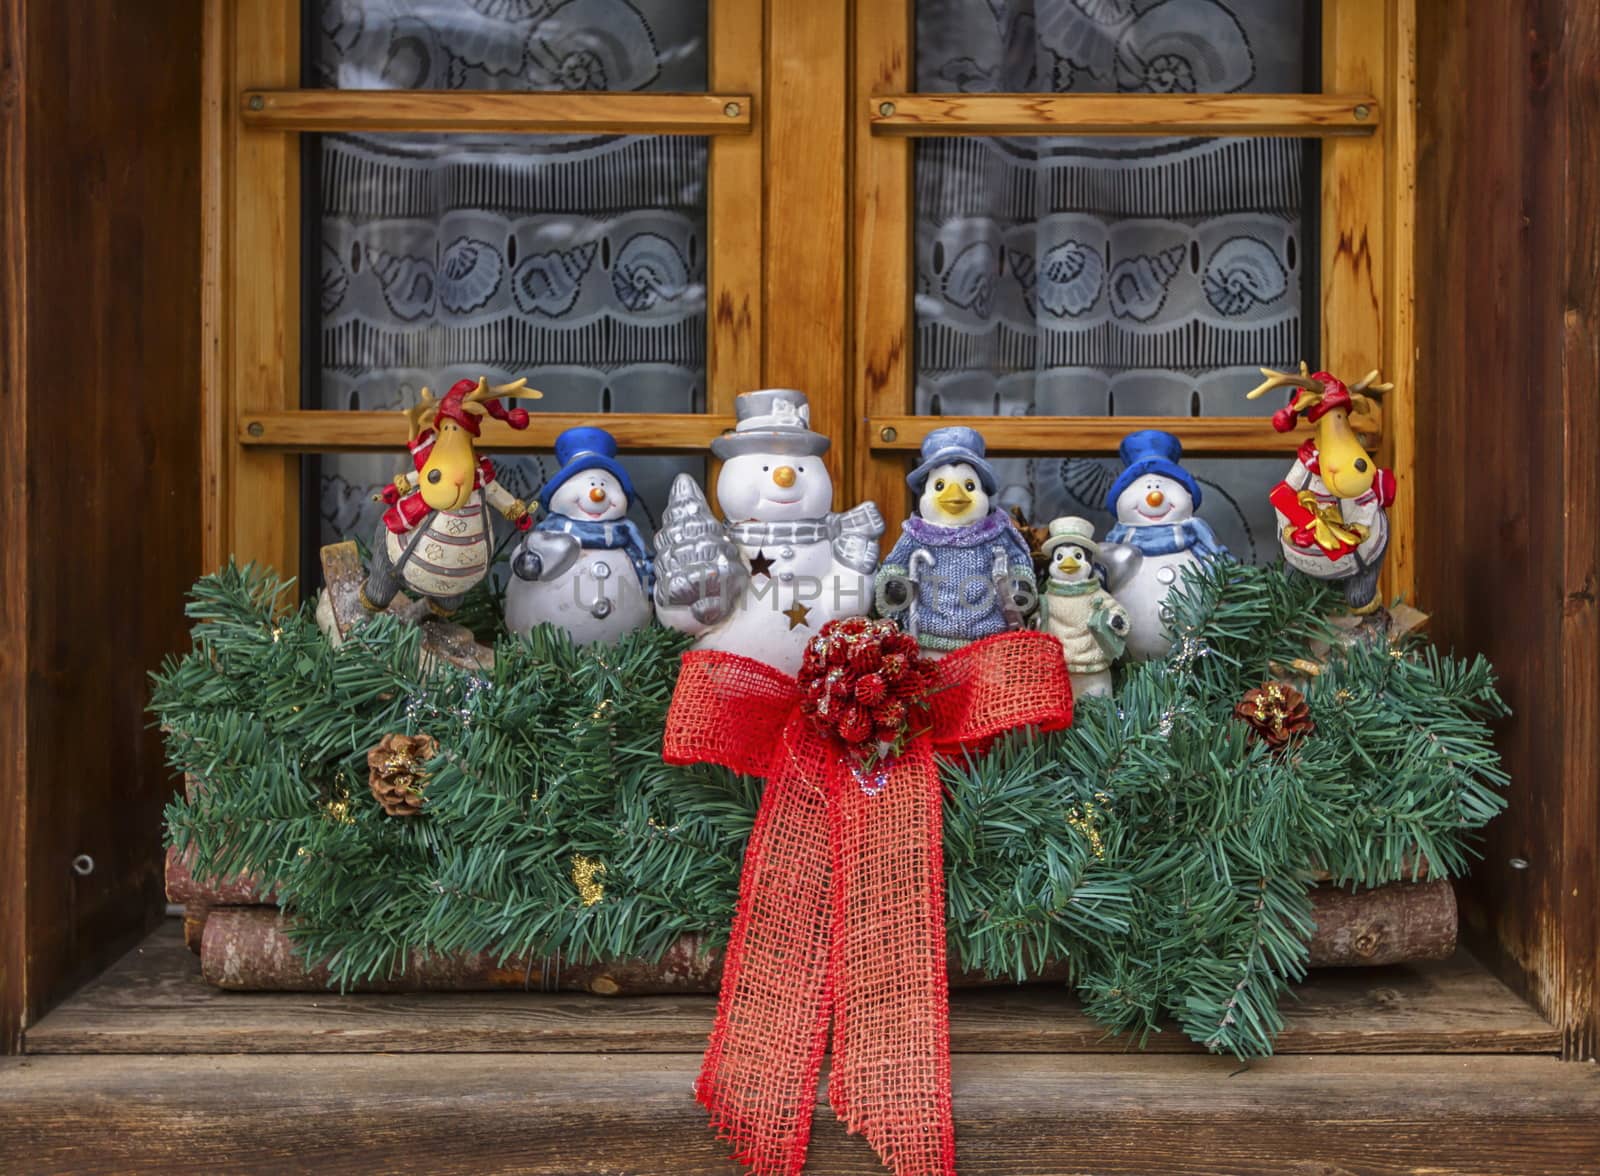 Christmas decoration dolls at the window made of wood by Elenaphotos21